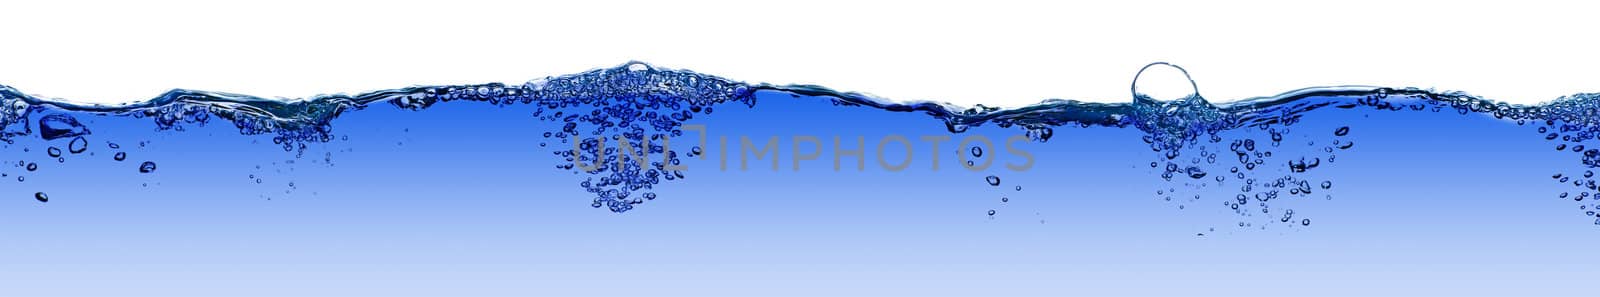 Isolated water splashing panorama with bubbles and water drops - by mozzyb